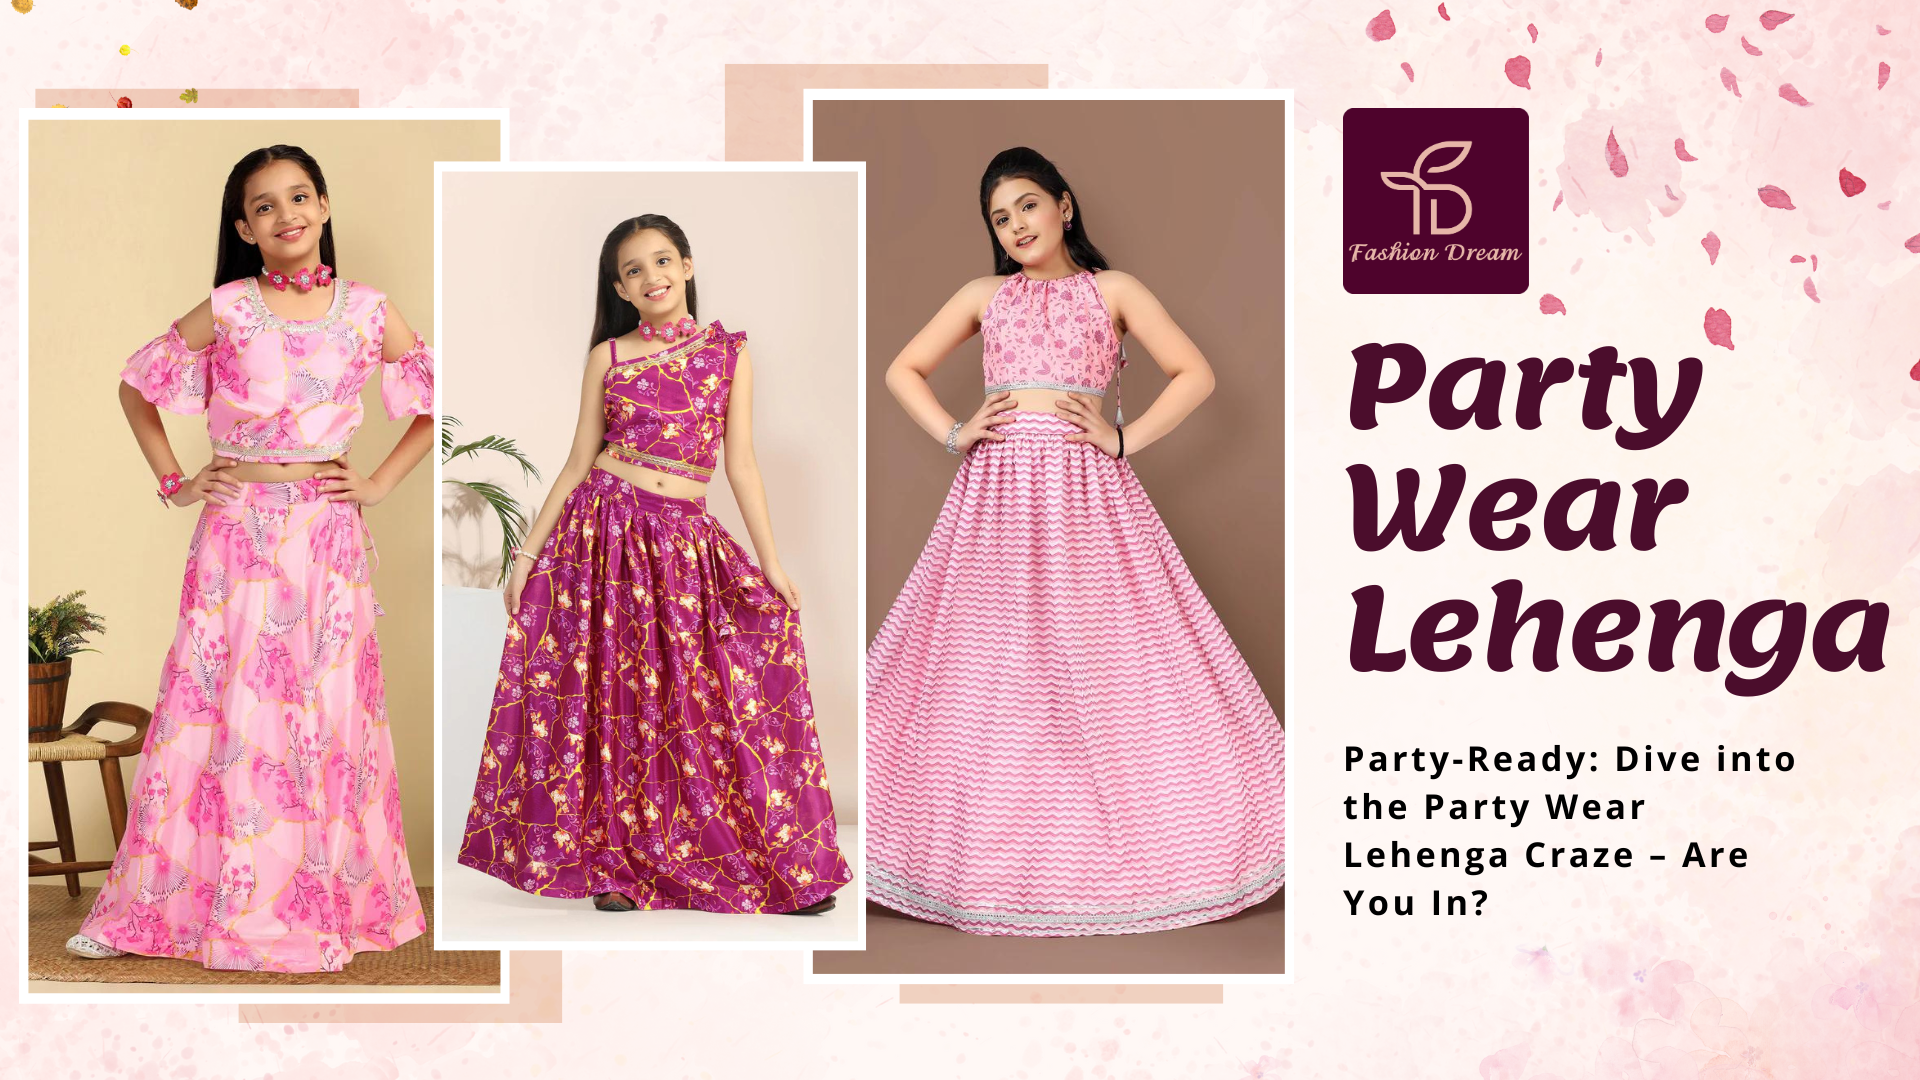 Party-Ready: Dive into the Party Wear Lehenga Craze – Are You In?